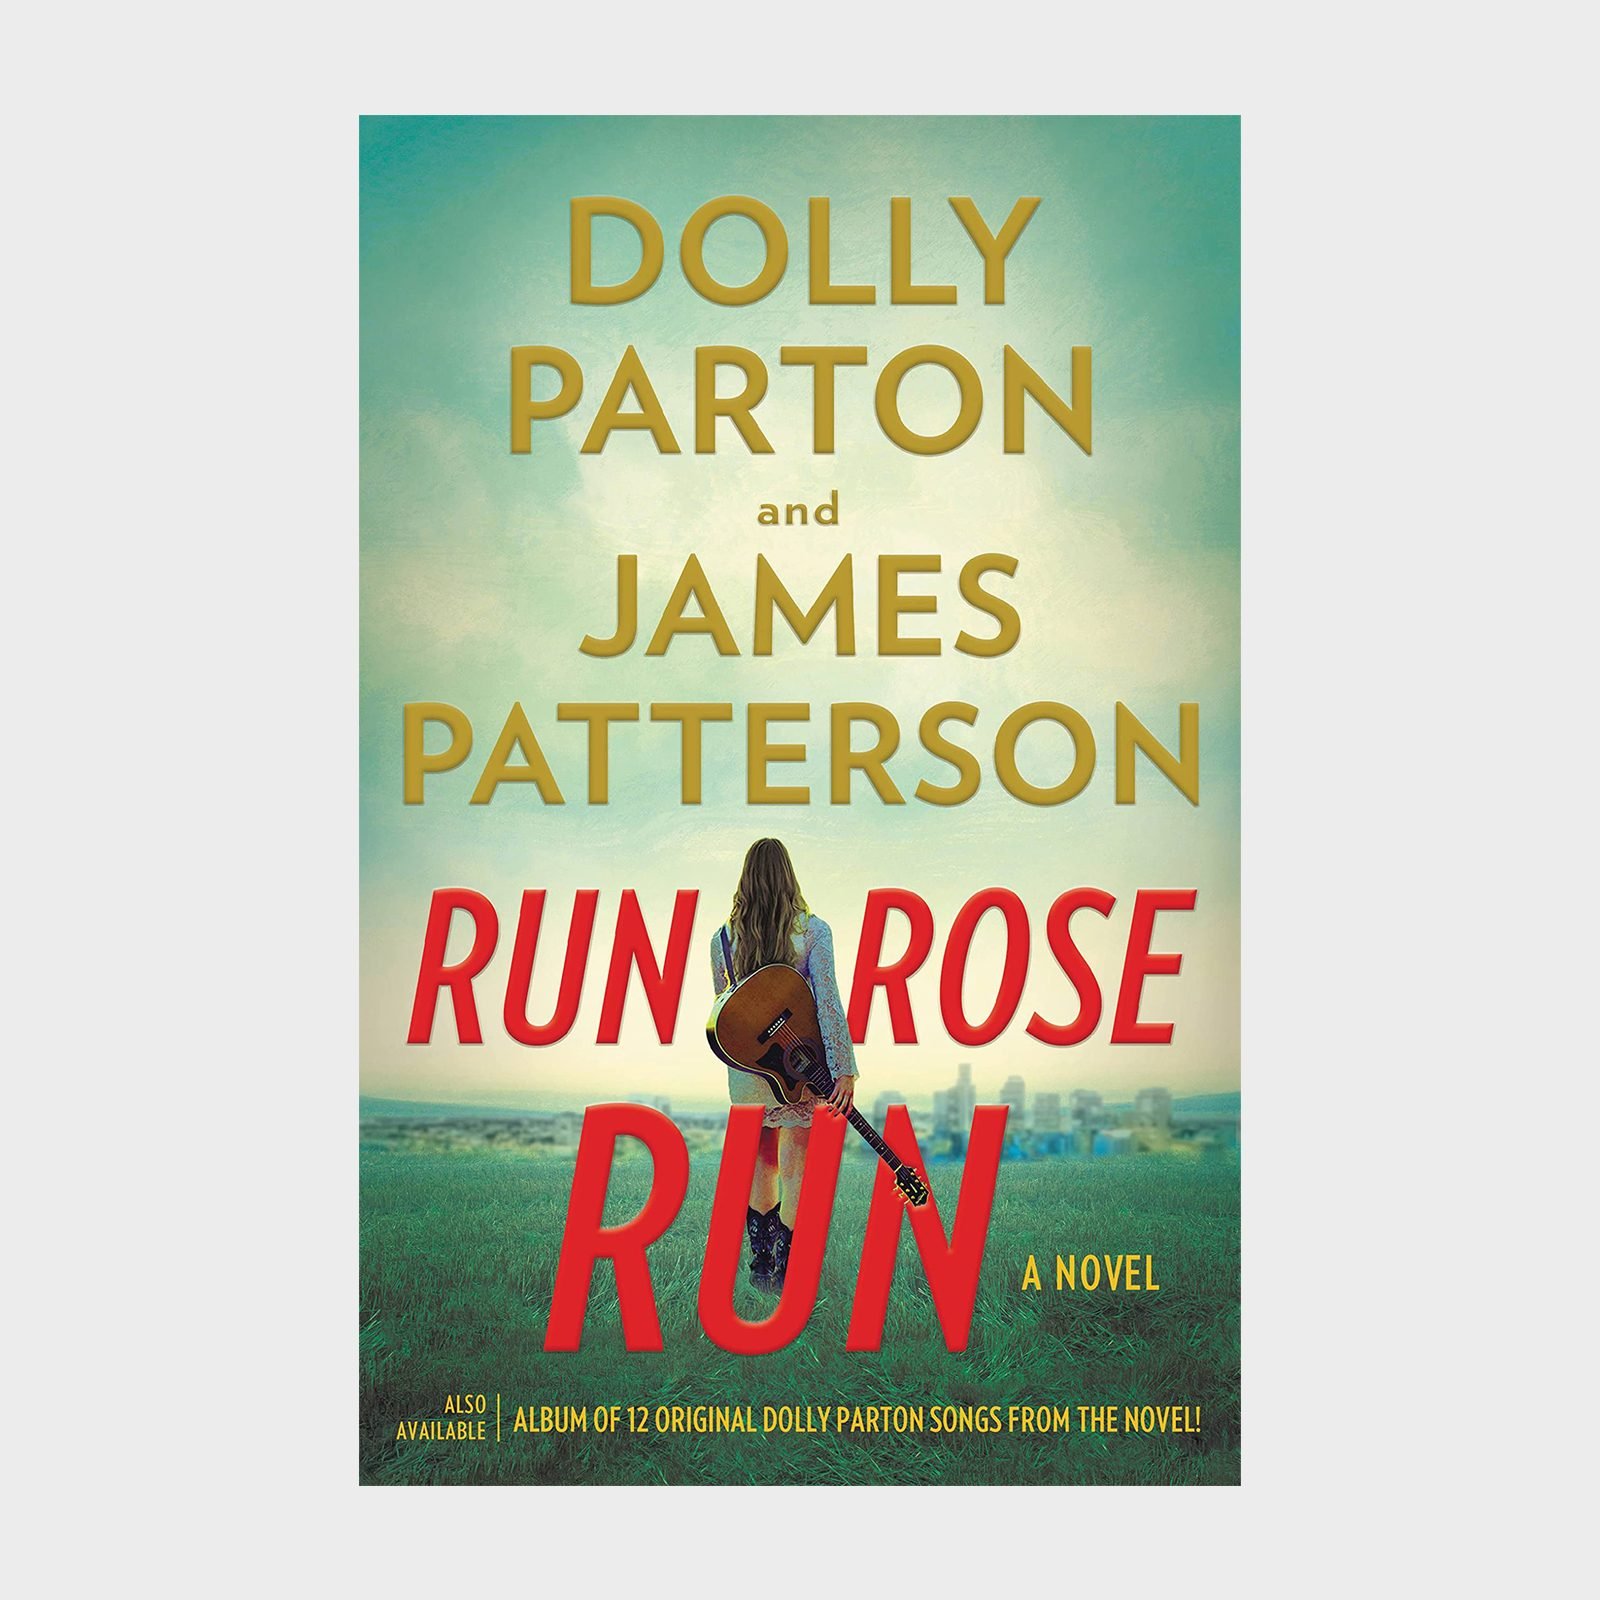 <p><strong>Release date: </strong>Mar. 7, 2022</p> <p>You read that right. <a href="https://www.amazon.com/Run-Rose-Novel-James-Patterson/dp/075955434X/" rel="noopener noreferrer">One of the most anticipated fiction books</a> of the year was co-authored by the country music queen herself, Dolly Parton. The powerhouse writing duo's tale of a young singer-songwriter escaping to Nashville will appeal to young readers as much as longtime bibliophiles and Dolly fans. It's as much the story of AnnieLee Keyes leaving an abusive past behind as it is a hard-knocks tale of relying on grit and creativity to achieve a dream. Fun fact: While this is the songstress's first novel, it's not her first book. In the '90s, her <a href="https://www.rd.com/list/best-autobiographies/" rel="noopener noreferrer">autobiography</a> hit the bestseller list.</p> <p class="listicle-page__cta-button-shop"><a class="shop-btn" href="https://www.amazon.com/Run-Rose-Novel-James-Patterson/dp/075955434X/">Shop Now</a></p>